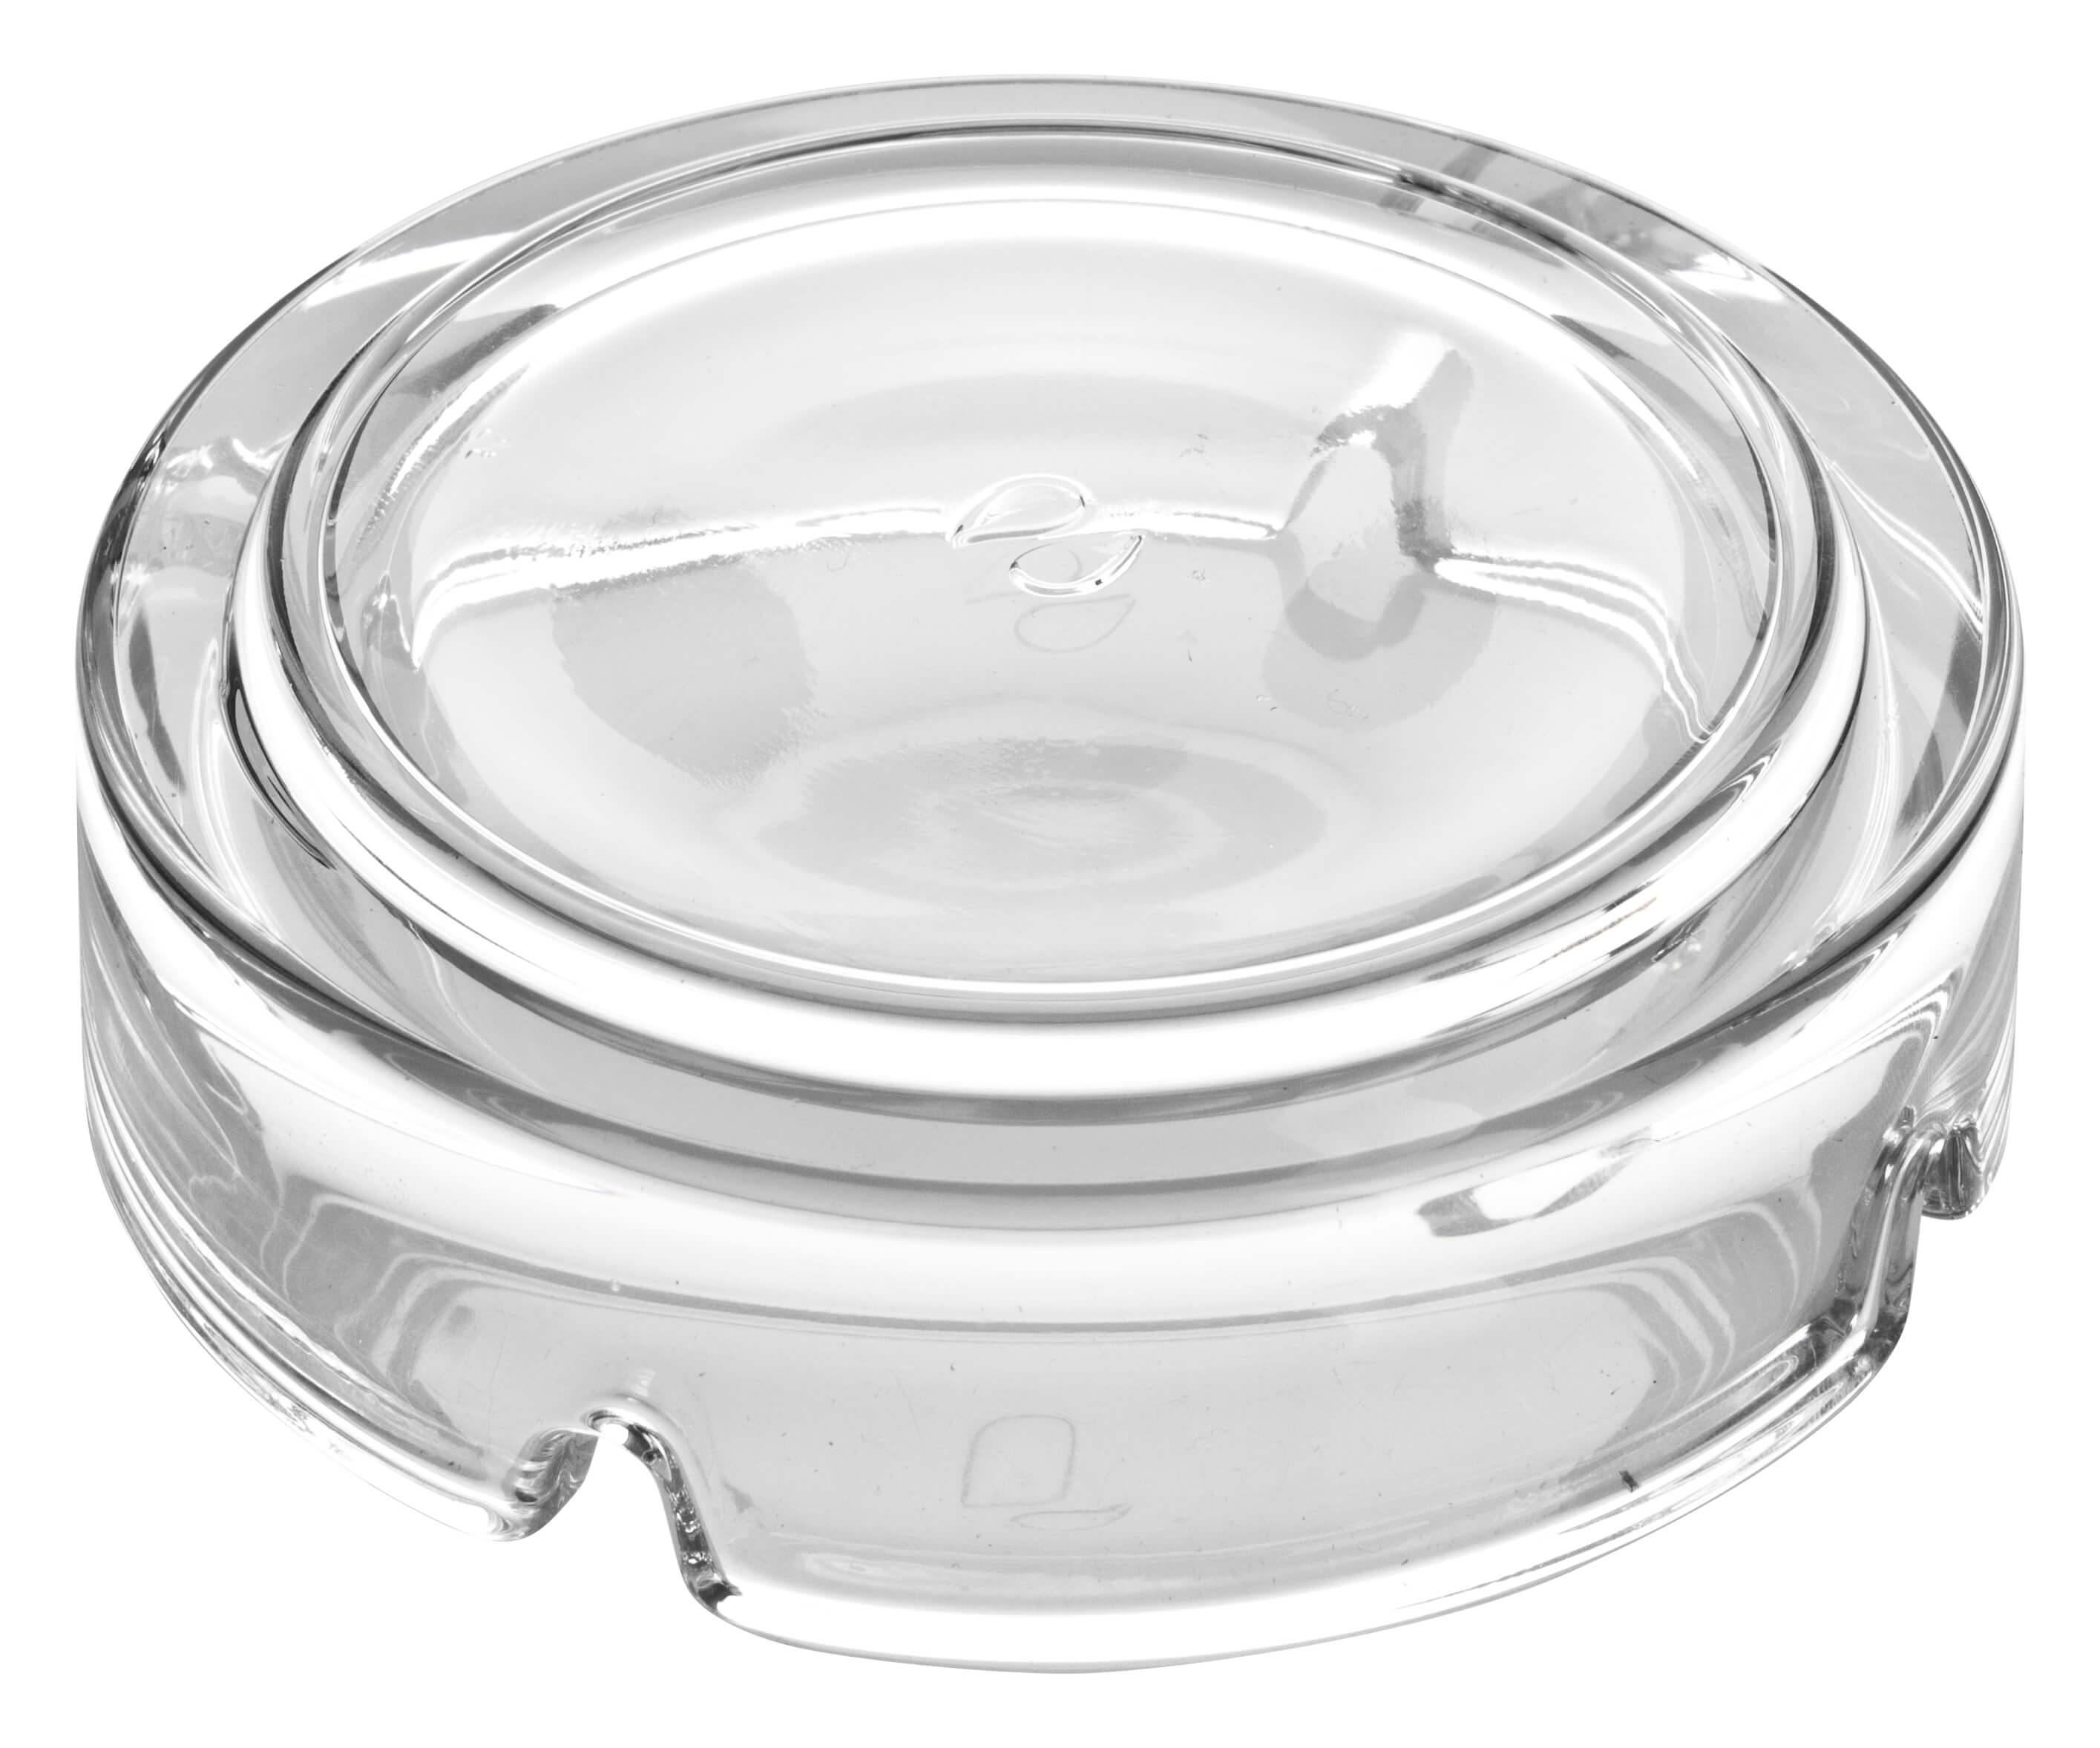 Ashtray Dresda, glass, round, stackable, Pasabahce (10,7cm)